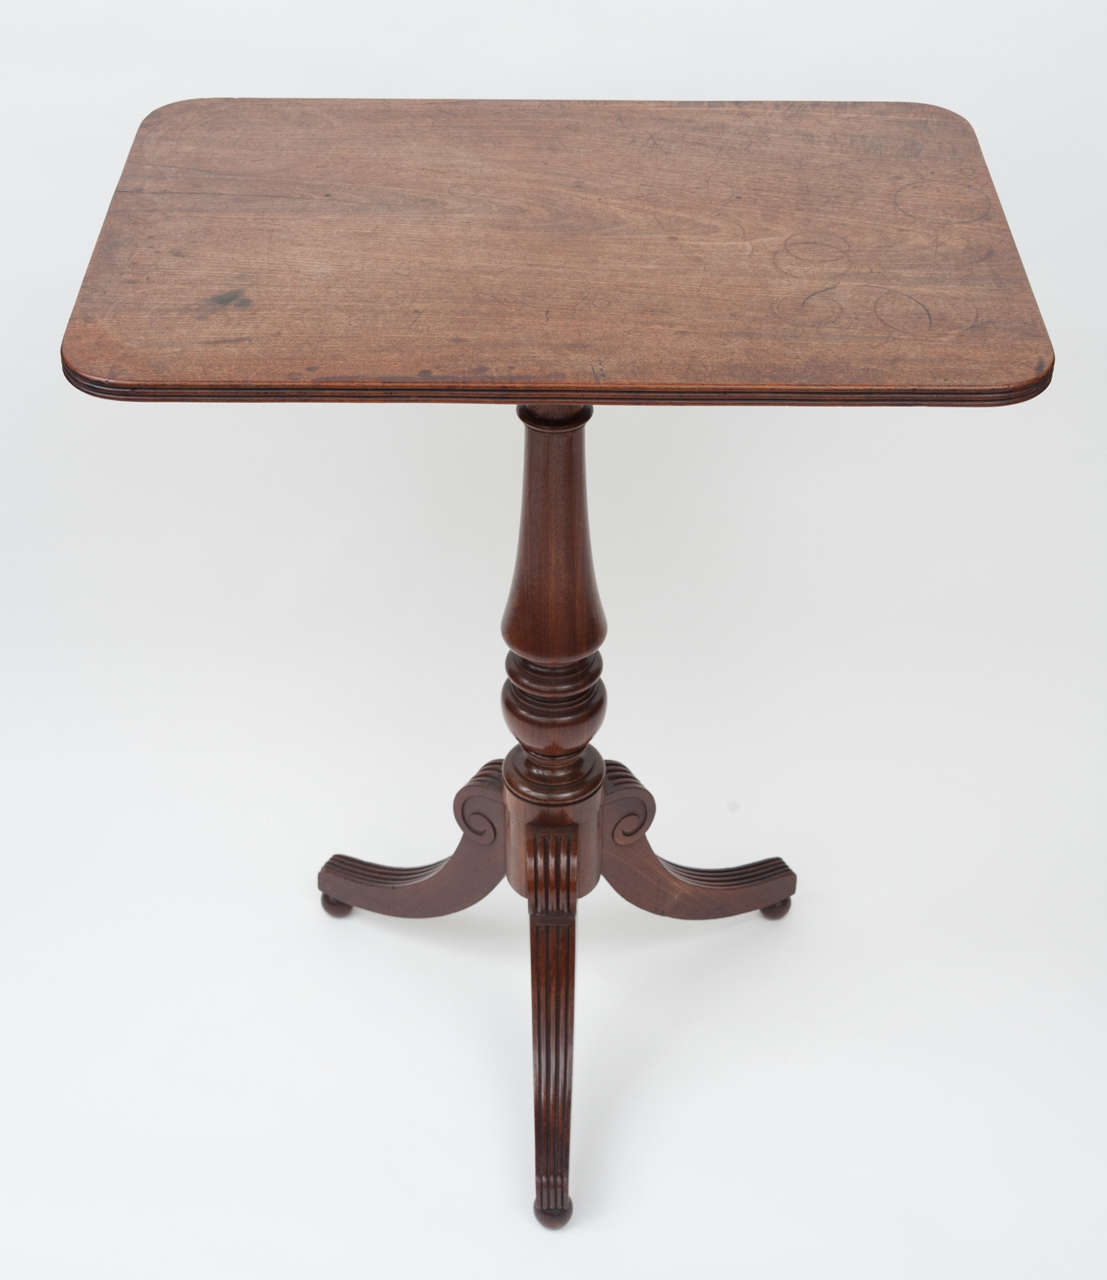 Good quality Regency Gillow mahogany occasional table, the rectangular top with rounded corners and reeded edge, the turned column with typical tripod base with elegant scrolled reeded legs with carved decoration. Stamped 'Gillows Lancaster'. Good